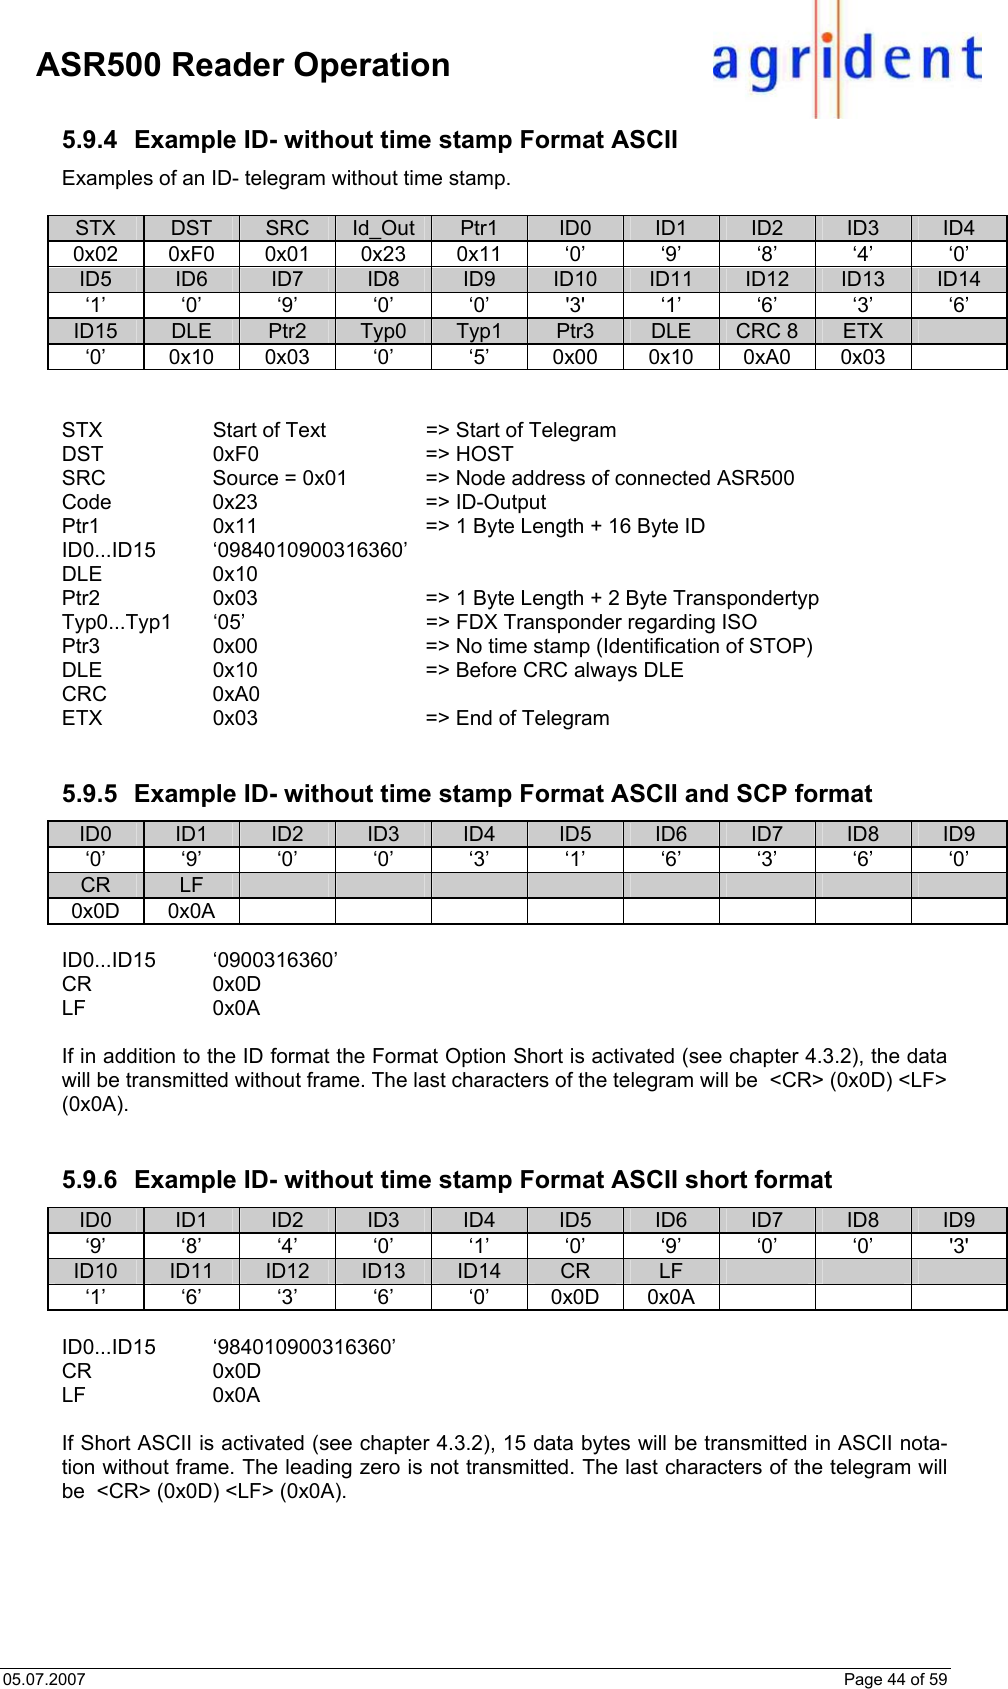 05.07.2007    Page 44 of 59     ASR500 Reader Operation 5.9.4  Example ID- without time stamp Format ASCII Examples of an ID- telegram without time stamp.  STX  DST  SRC  Id_Out  Ptr1  ID0  ID1  ID2  ID3  ID4 0x02 0xF0 0x01 0x23 0x11 ‘0’ ‘9’ ‘8’ ‘4’ ‘0’ ID5  ID6  ID7  ID8  ID9  ID10  ID11  ID12  ID13  ID14 ‘1’ ‘0’ ‘9’ ‘0’ ‘0’ &apos;3&apos; ‘1’ ‘6’ ‘3’ ‘6’ ID15  DLE  Ptr2  Typ0  Typ1  Ptr3  DLE  CRC 8  ETX   ‘0’ 0x10 0x03 ‘0’  ‘5’ 0x00 0x10 0xA0 0x03     STX  Start of Text   =&gt; Start of Telegram DST  0xF0   =&gt; HOST SRC  Source = 0x01   =&gt; Node address of connected ASR500 Code 0x23  =&gt; ID-Output Ptr1  0x11  =&gt; 1 Byte Length + 16 Byte ID ID0...ID15 ‘0984010900316360’ DLE 0x10   Ptr2  0x03  =&gt; 1 Byte Length + 2 Byte Transpondertyp Typ0...Typ1  ‘05’  =&gt; FDX Transponder regarding ISO Ptr3  0x00  =&gt; No time stamp (Identification of STOP) DLE  0x10  =&gt; Before CRC always DLE CRC 0xA0 ETX  0x03  =&gt; End of Telegram   5.9.5  Example ID- without time stamp Format ASCII and SCP format ID0  ID1  ID2  ID3  ID4  ID5  ID6  ID7  ID8  ID9 ‘0’ ‘9’ ‘0’ ‘0’ ‘3’ ‘1’ ‘6’ ‘3’ ‘6’ ‘0’ CR  LF                 0x0D 0x0A          ID0...ID15 ‘0900316360’ CR 0x0D   LF 0x0A    If in addition to the ID format the Format Option Short is activated (see chapter 4.3.2), the data will be transmitted without frame. The last characters of the telegram will be  &lt;CR&gt; (0x0D) &lt;LF&gt; (0x0A).   5.9.6  Example ID- without time stamp Format ASCII short format ID0  ID1  ID2  ID3  ID4  ID5  ID6  ID7  ID8  ID9 ‘9’ ‘8’ ‘4’ ‘0’ ‘1’ ‘0’ ‘9’ ‘0’ ‘0’ &apos;3&apos; ID10  ID11  ID12  ID13  ID14  CR  LF       ‘1’ ‘6’ ‘3’ ‘6’ ‘0’ 0x0D 0x0A       ID0...ID15 ‘984010900316360’ CR 0x0D   LF 0x0A    If Short ASCII is activated (see chapter 4.3.2), 15 data bytes will be transmitted in ASCII nota-tion without frame. The leading zero is not transmitted. The last characters of the telegram will be  &lt;CR&gt; (0x0D) &lt;LF&gt; (0x0A). 